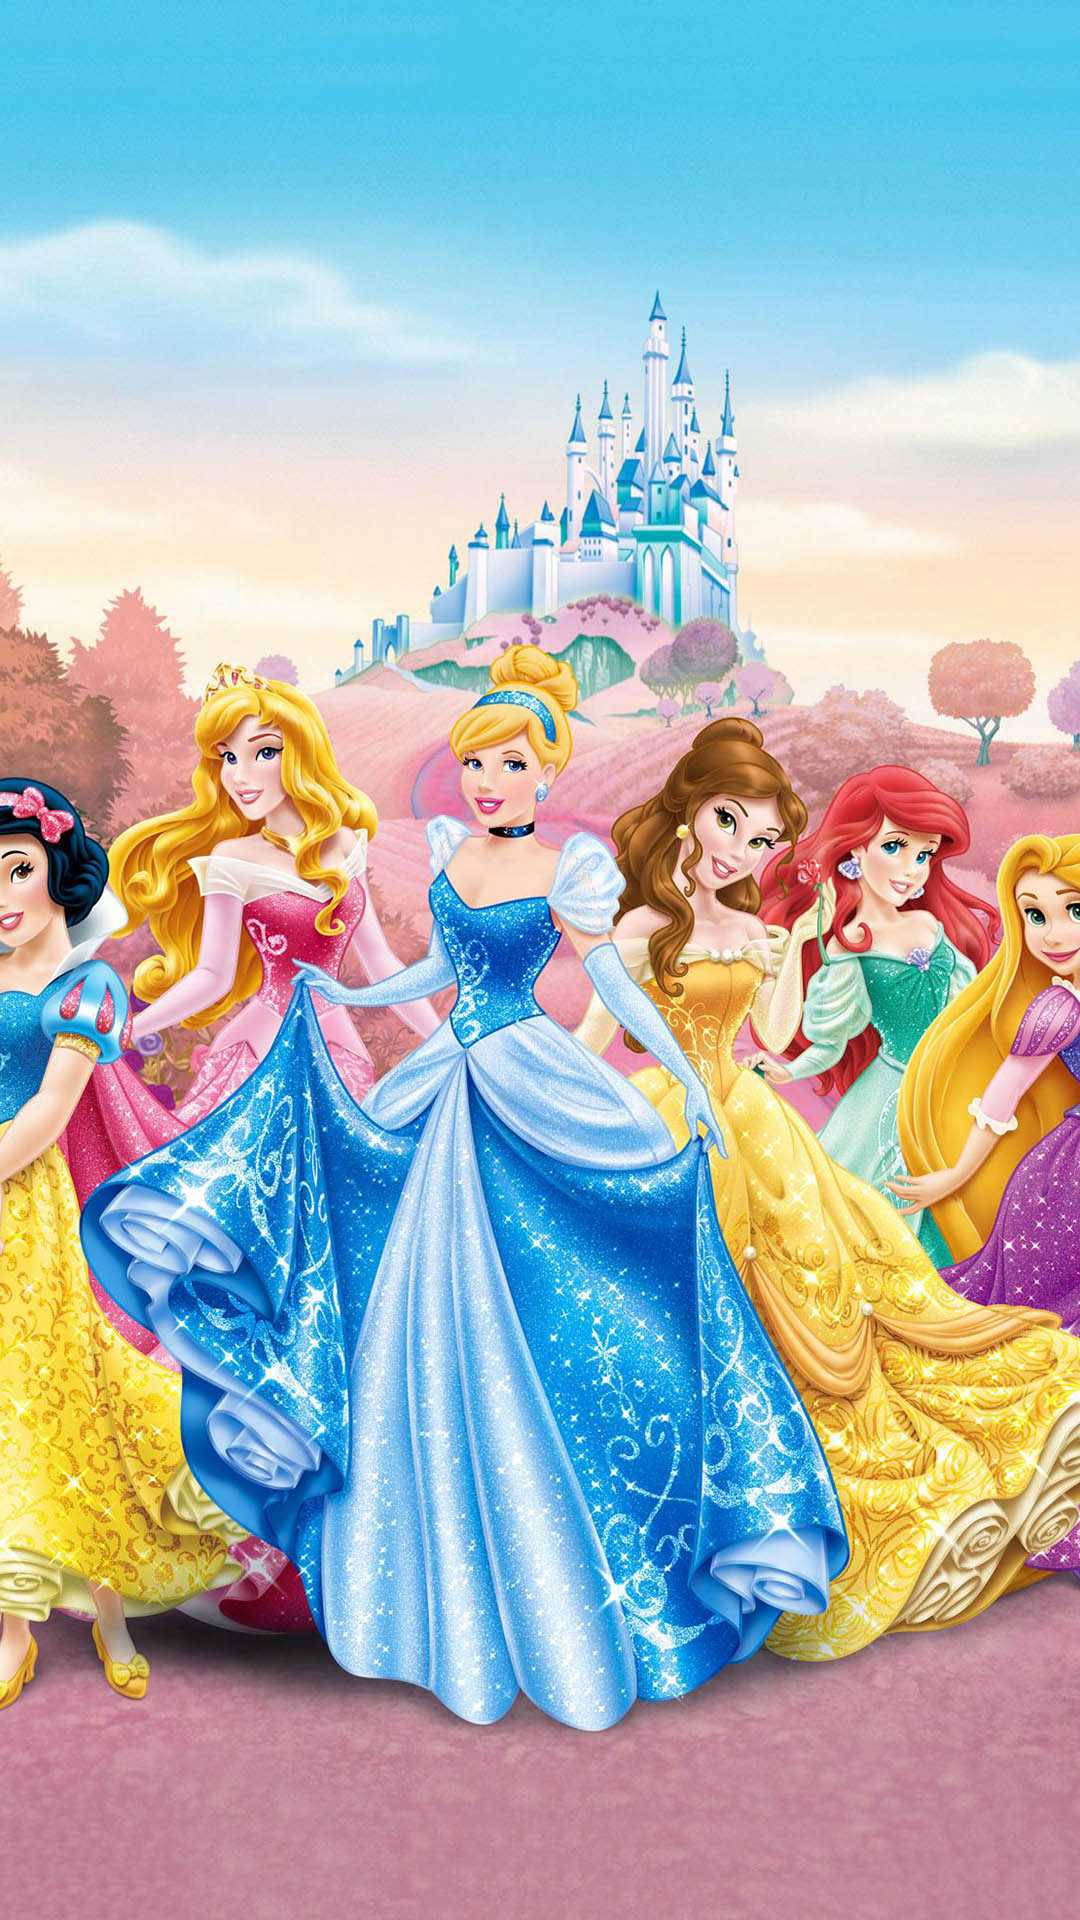 Download “A dream is a wish your heart makes: Create your own magical  fairytale with this whimsical Cute Aesthetic Disney Princess wallpaper.”  Wallpaper